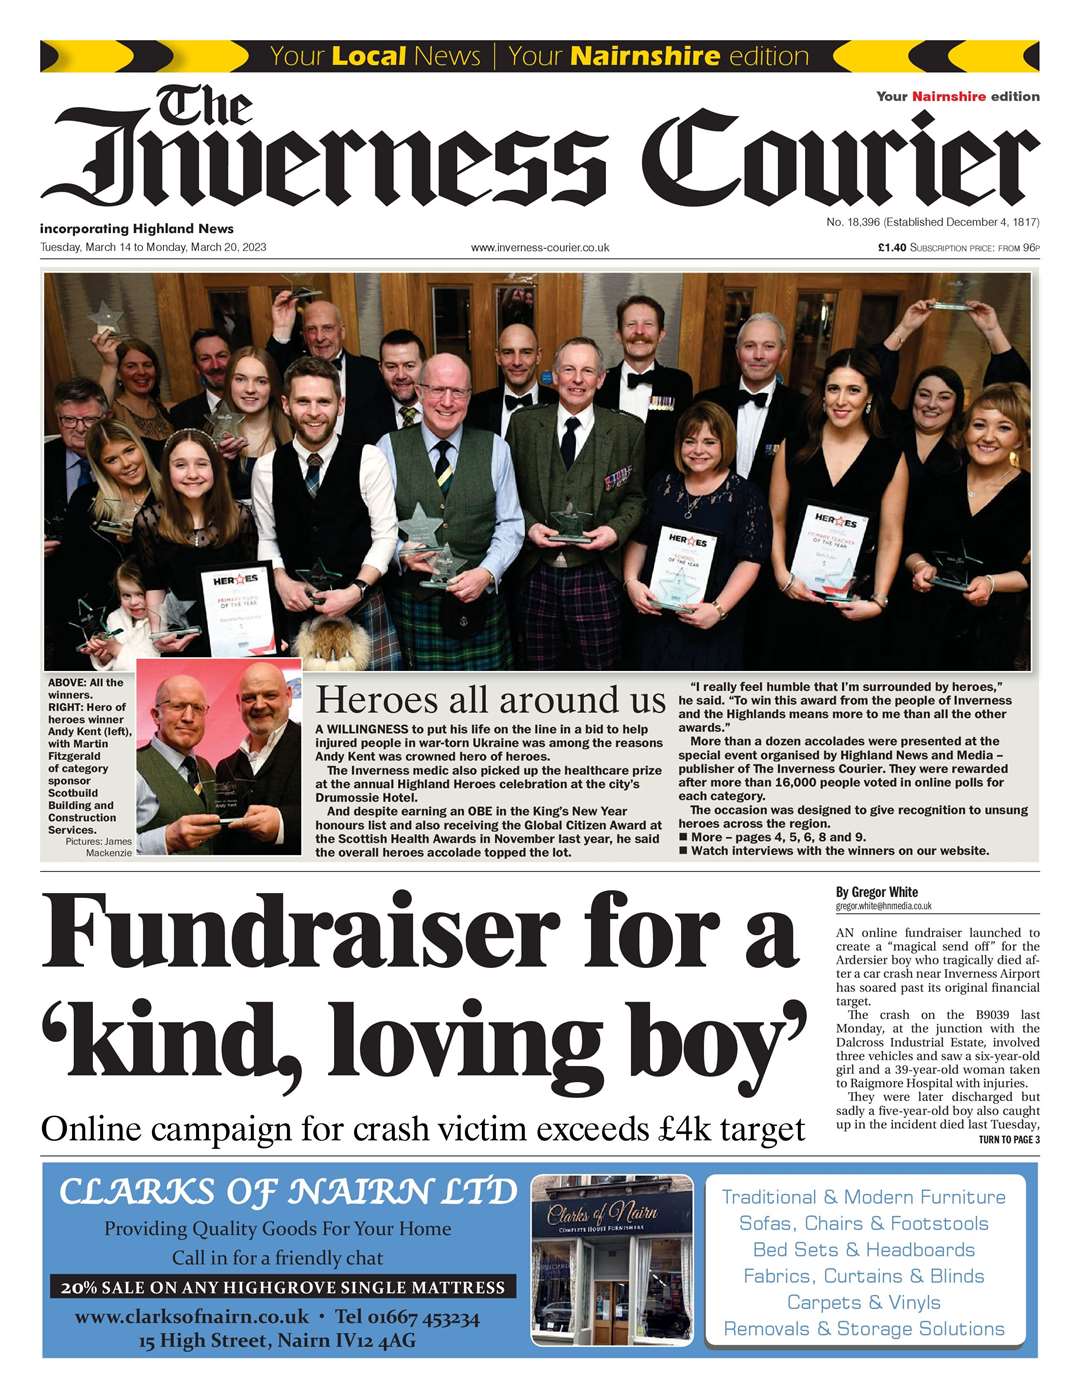 The Inverness Courier (Nairnshire edition), March 14, front page.